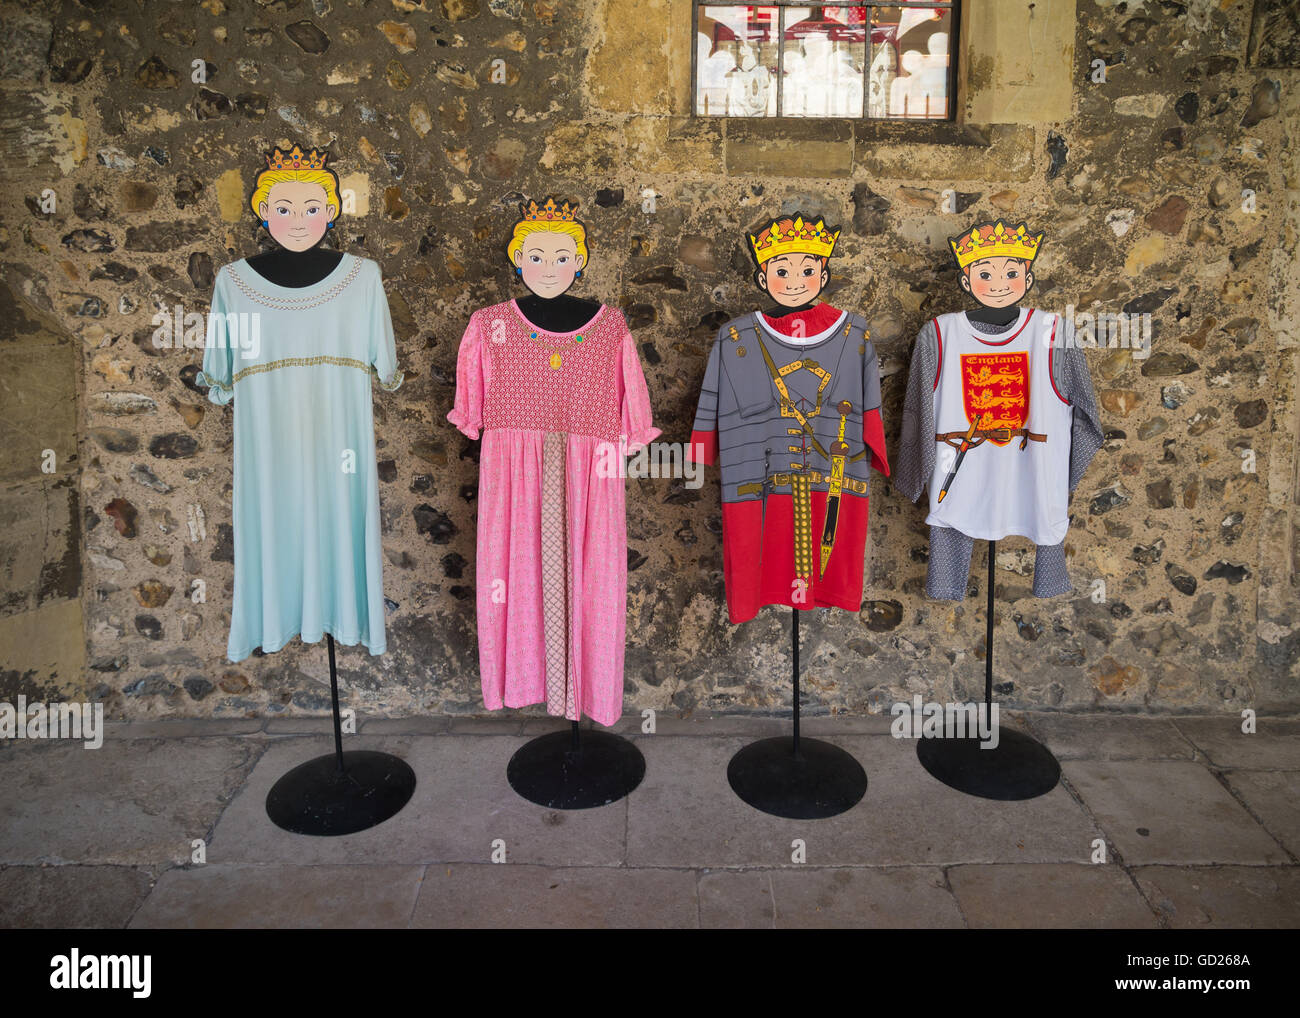 CHICHESTER, ENGLAND - OCTOBER 22, 2015: mannequins with mediaval children cloths in the Chichester cathedral Stock Photo